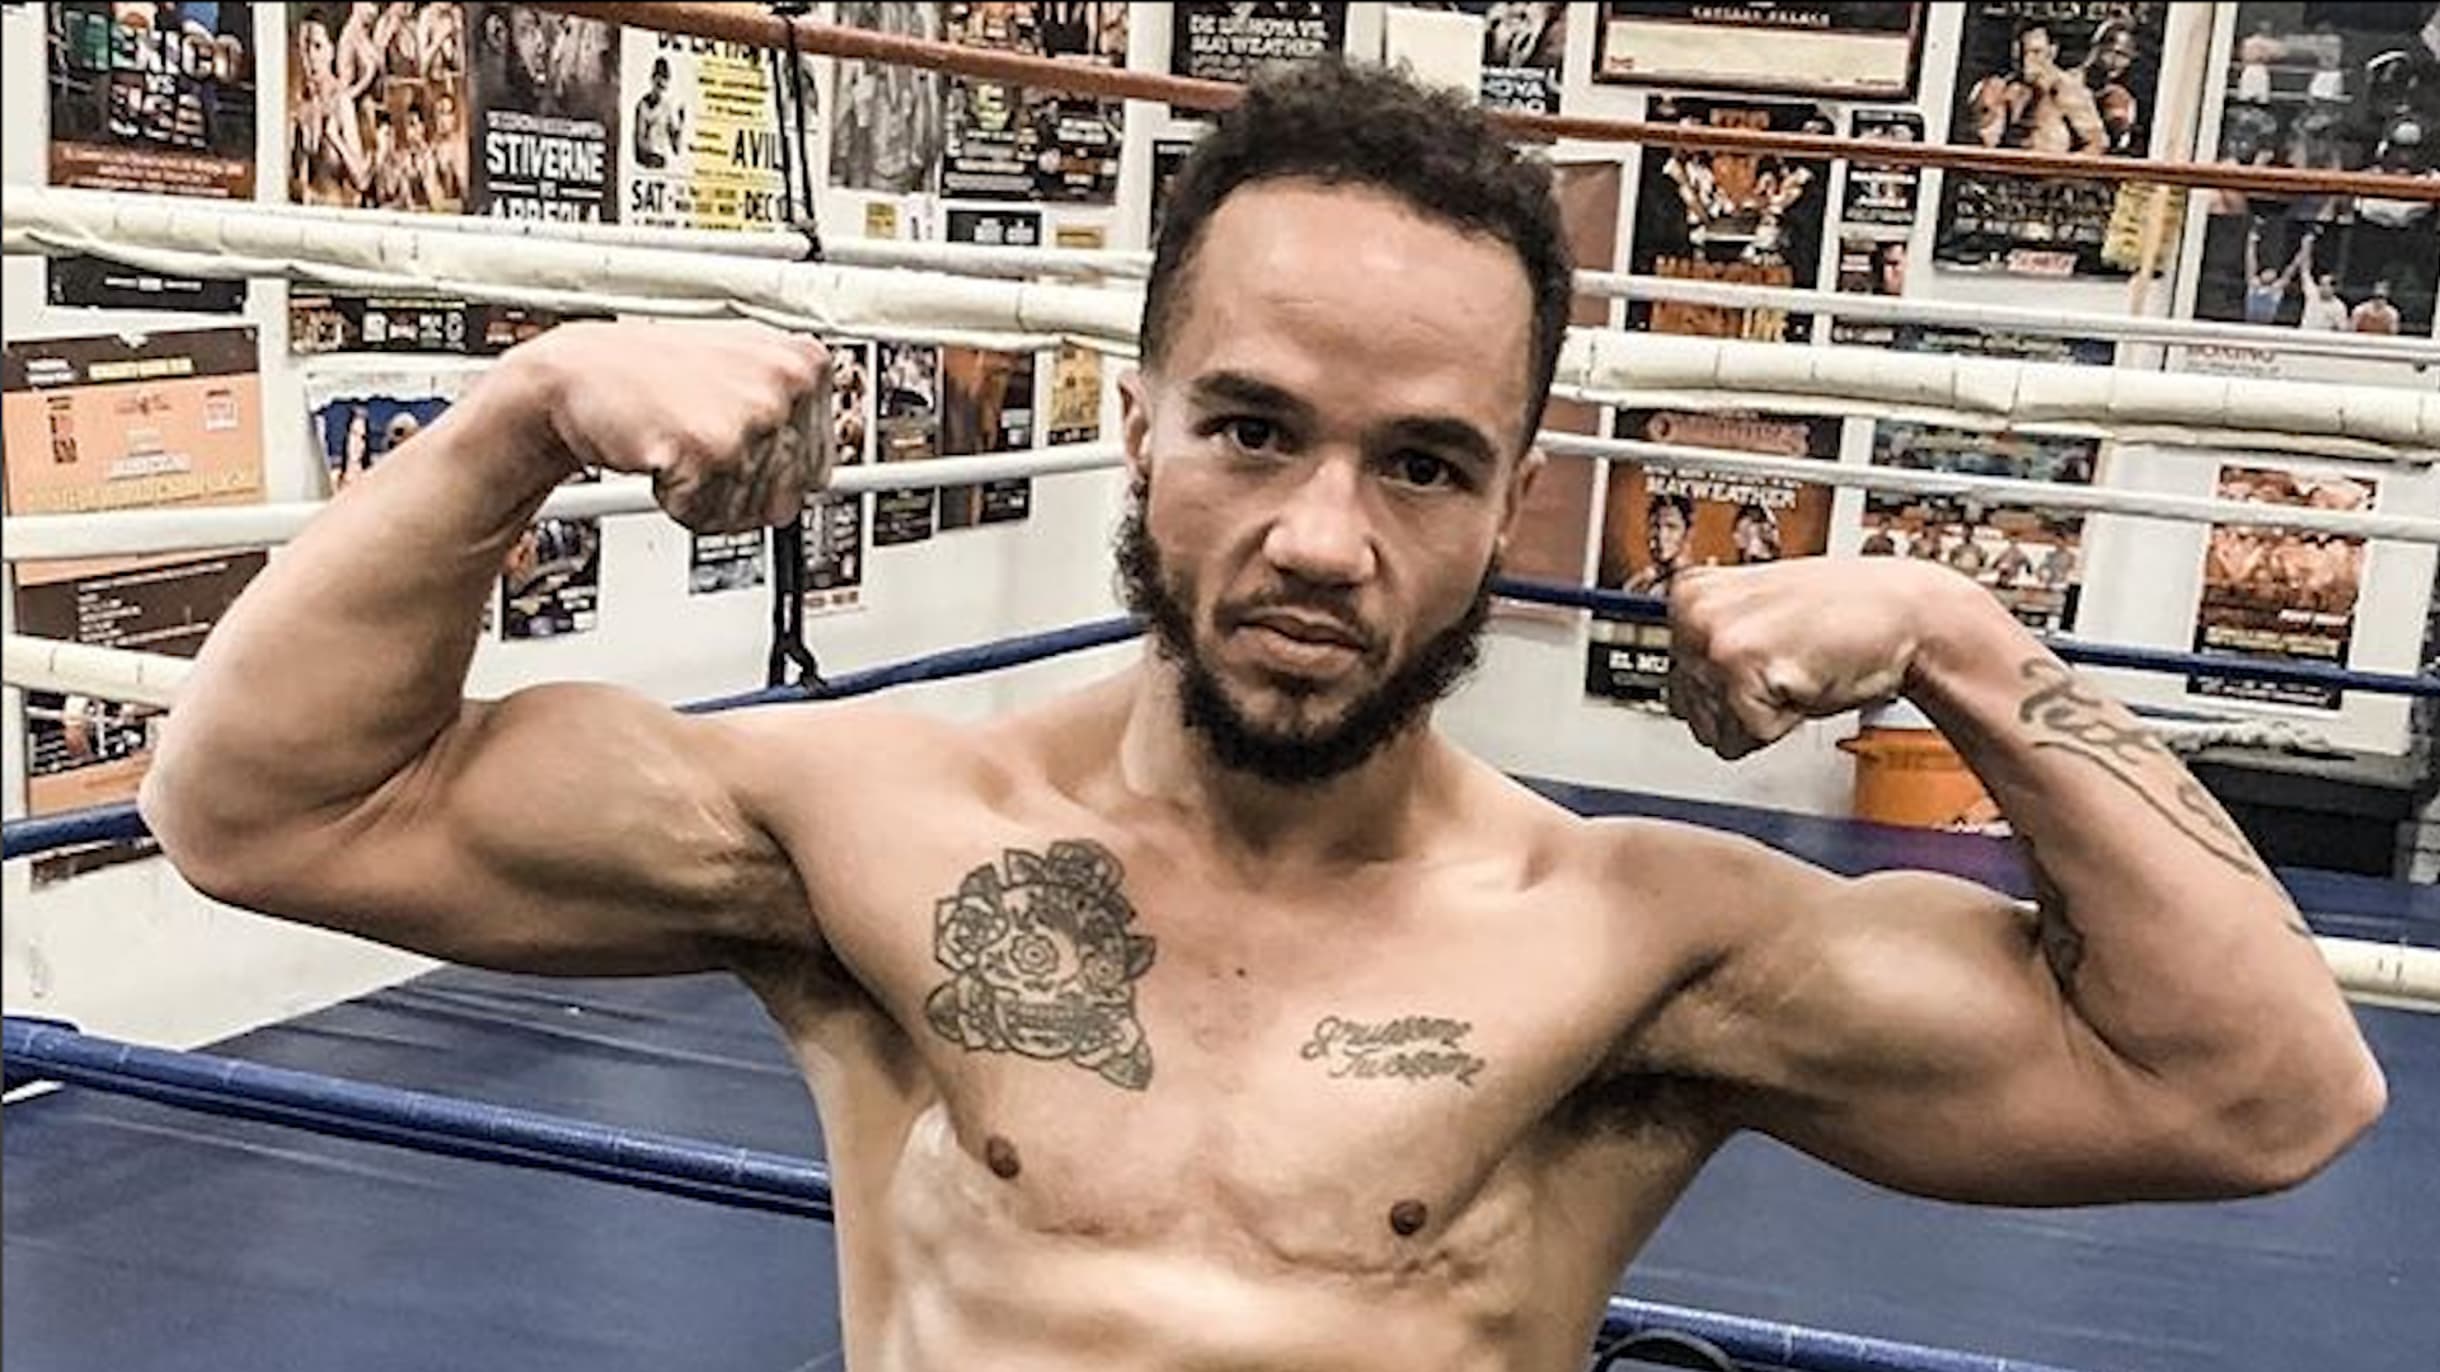 Transgender boxer Pat Manuel makes history with first professional win